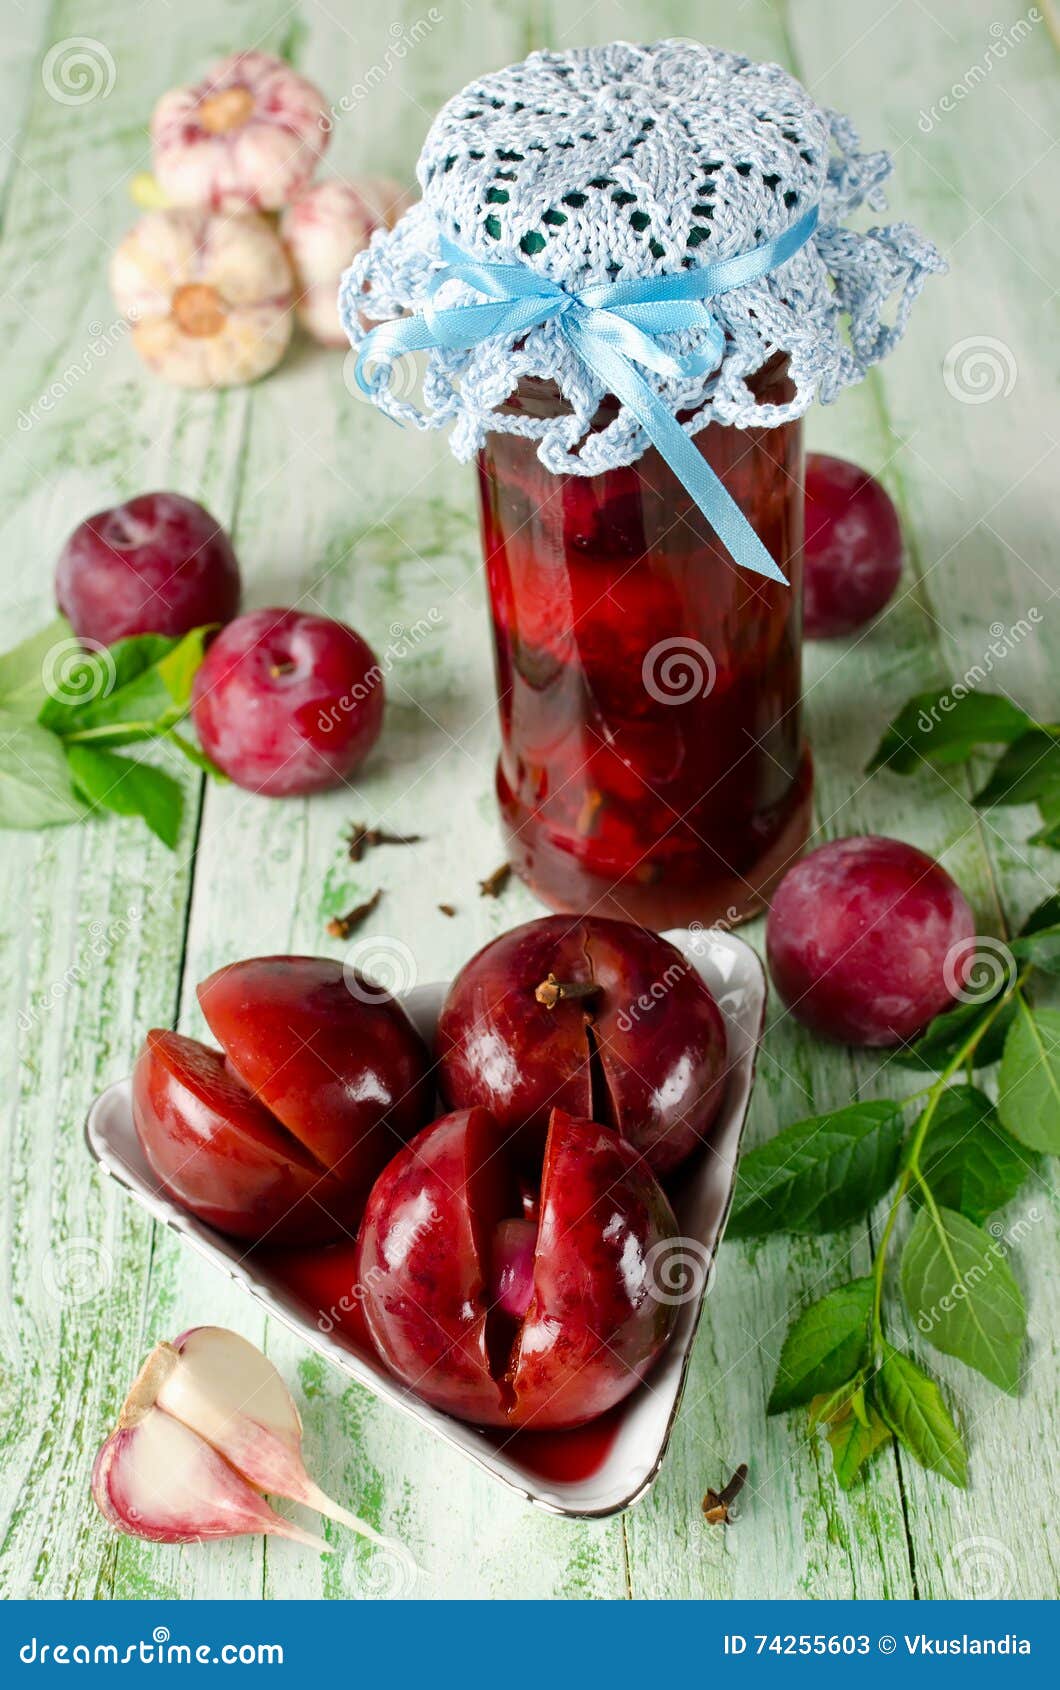 Pickled plum with garlic stock image. Image of bowl, bottle - 74255603